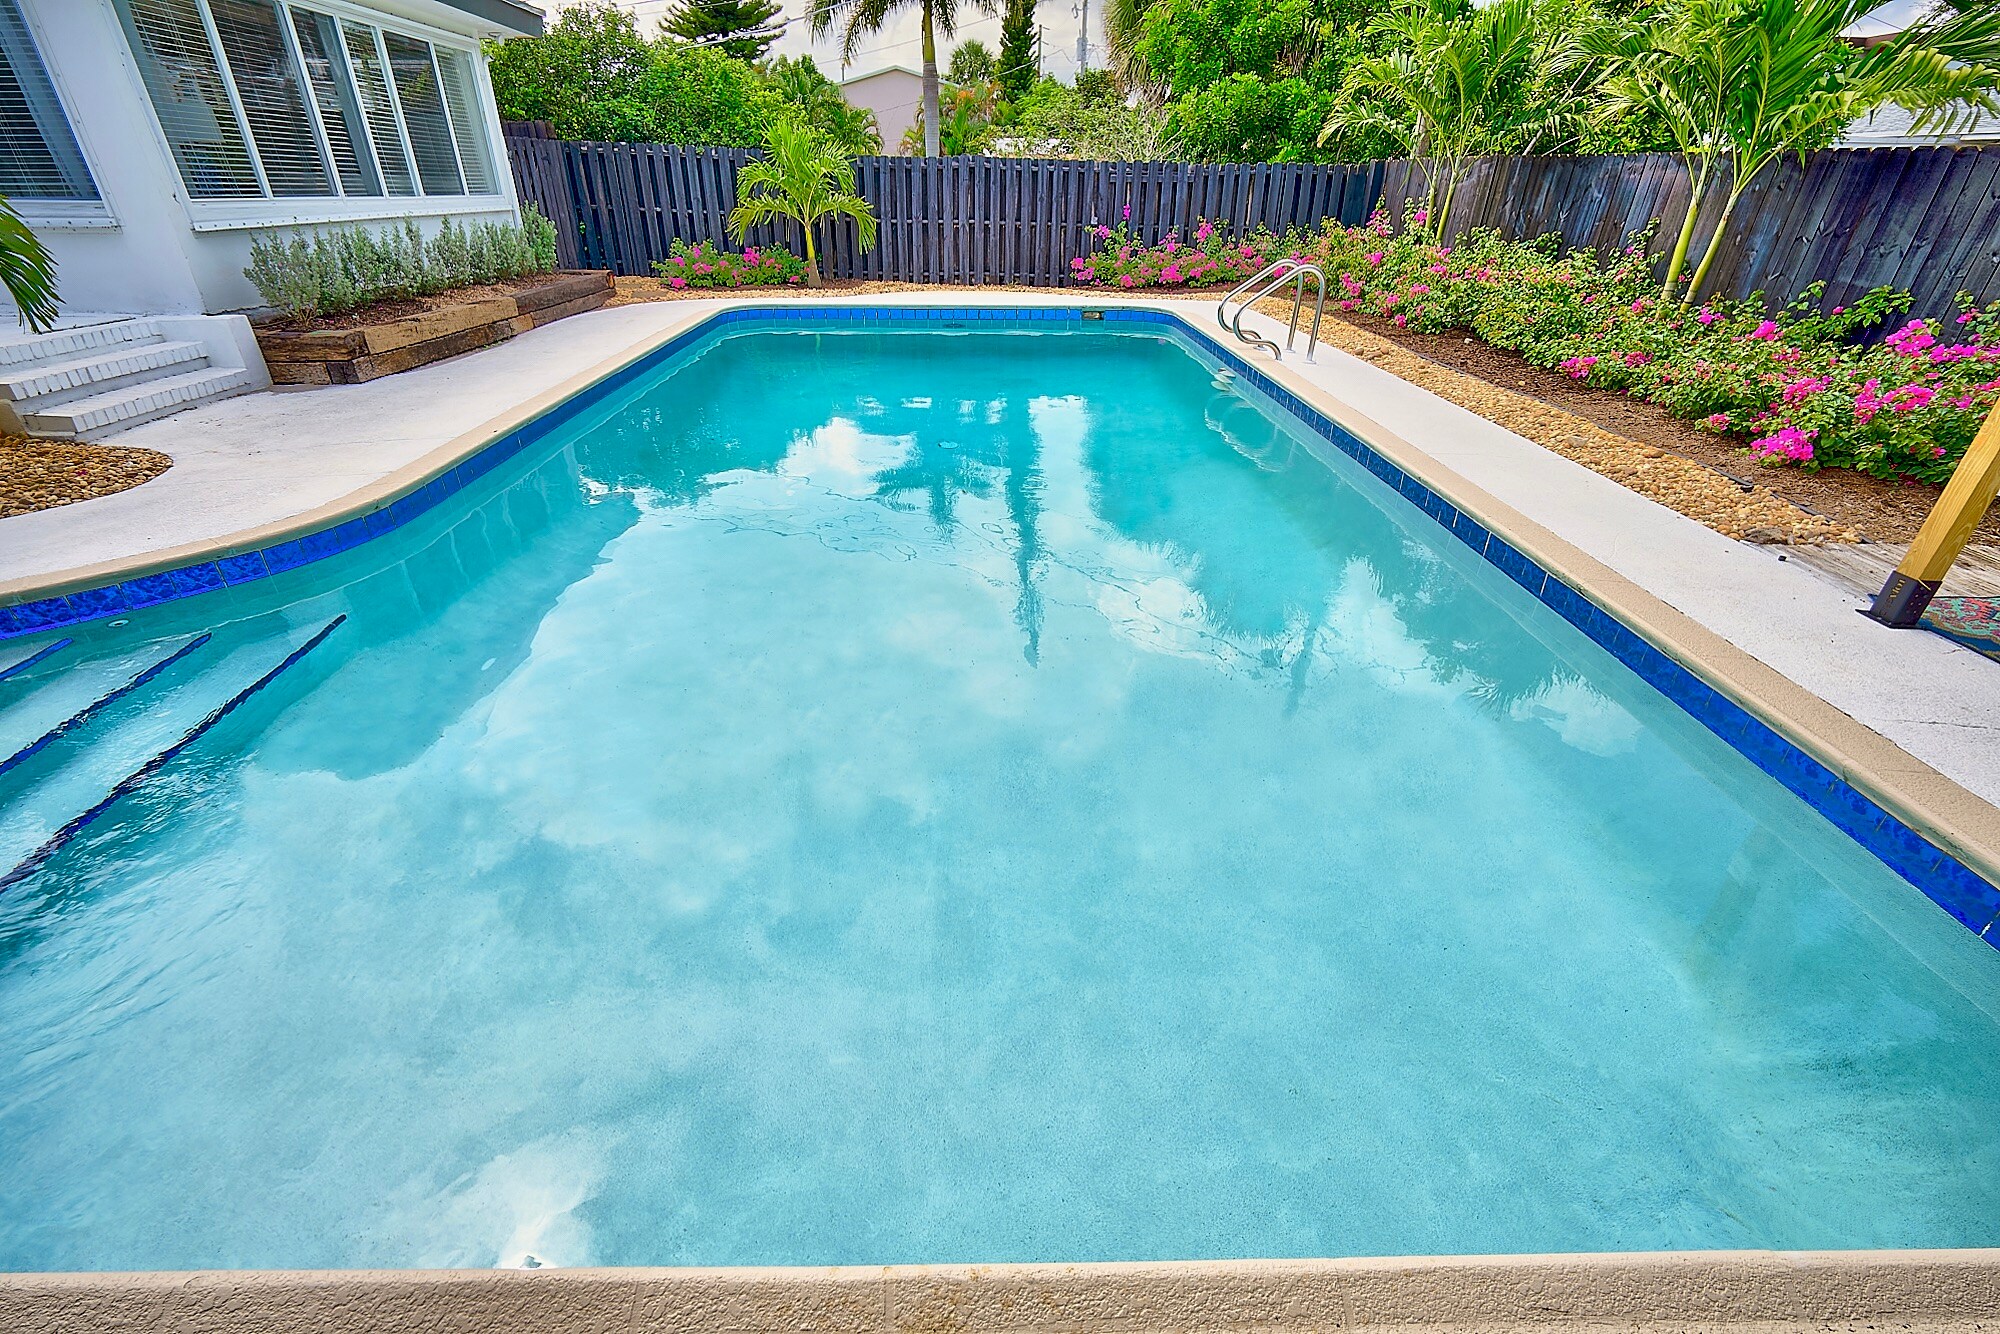 Property Image 1 - Santorini Pool House Wilton Manors Walk to the Dr.